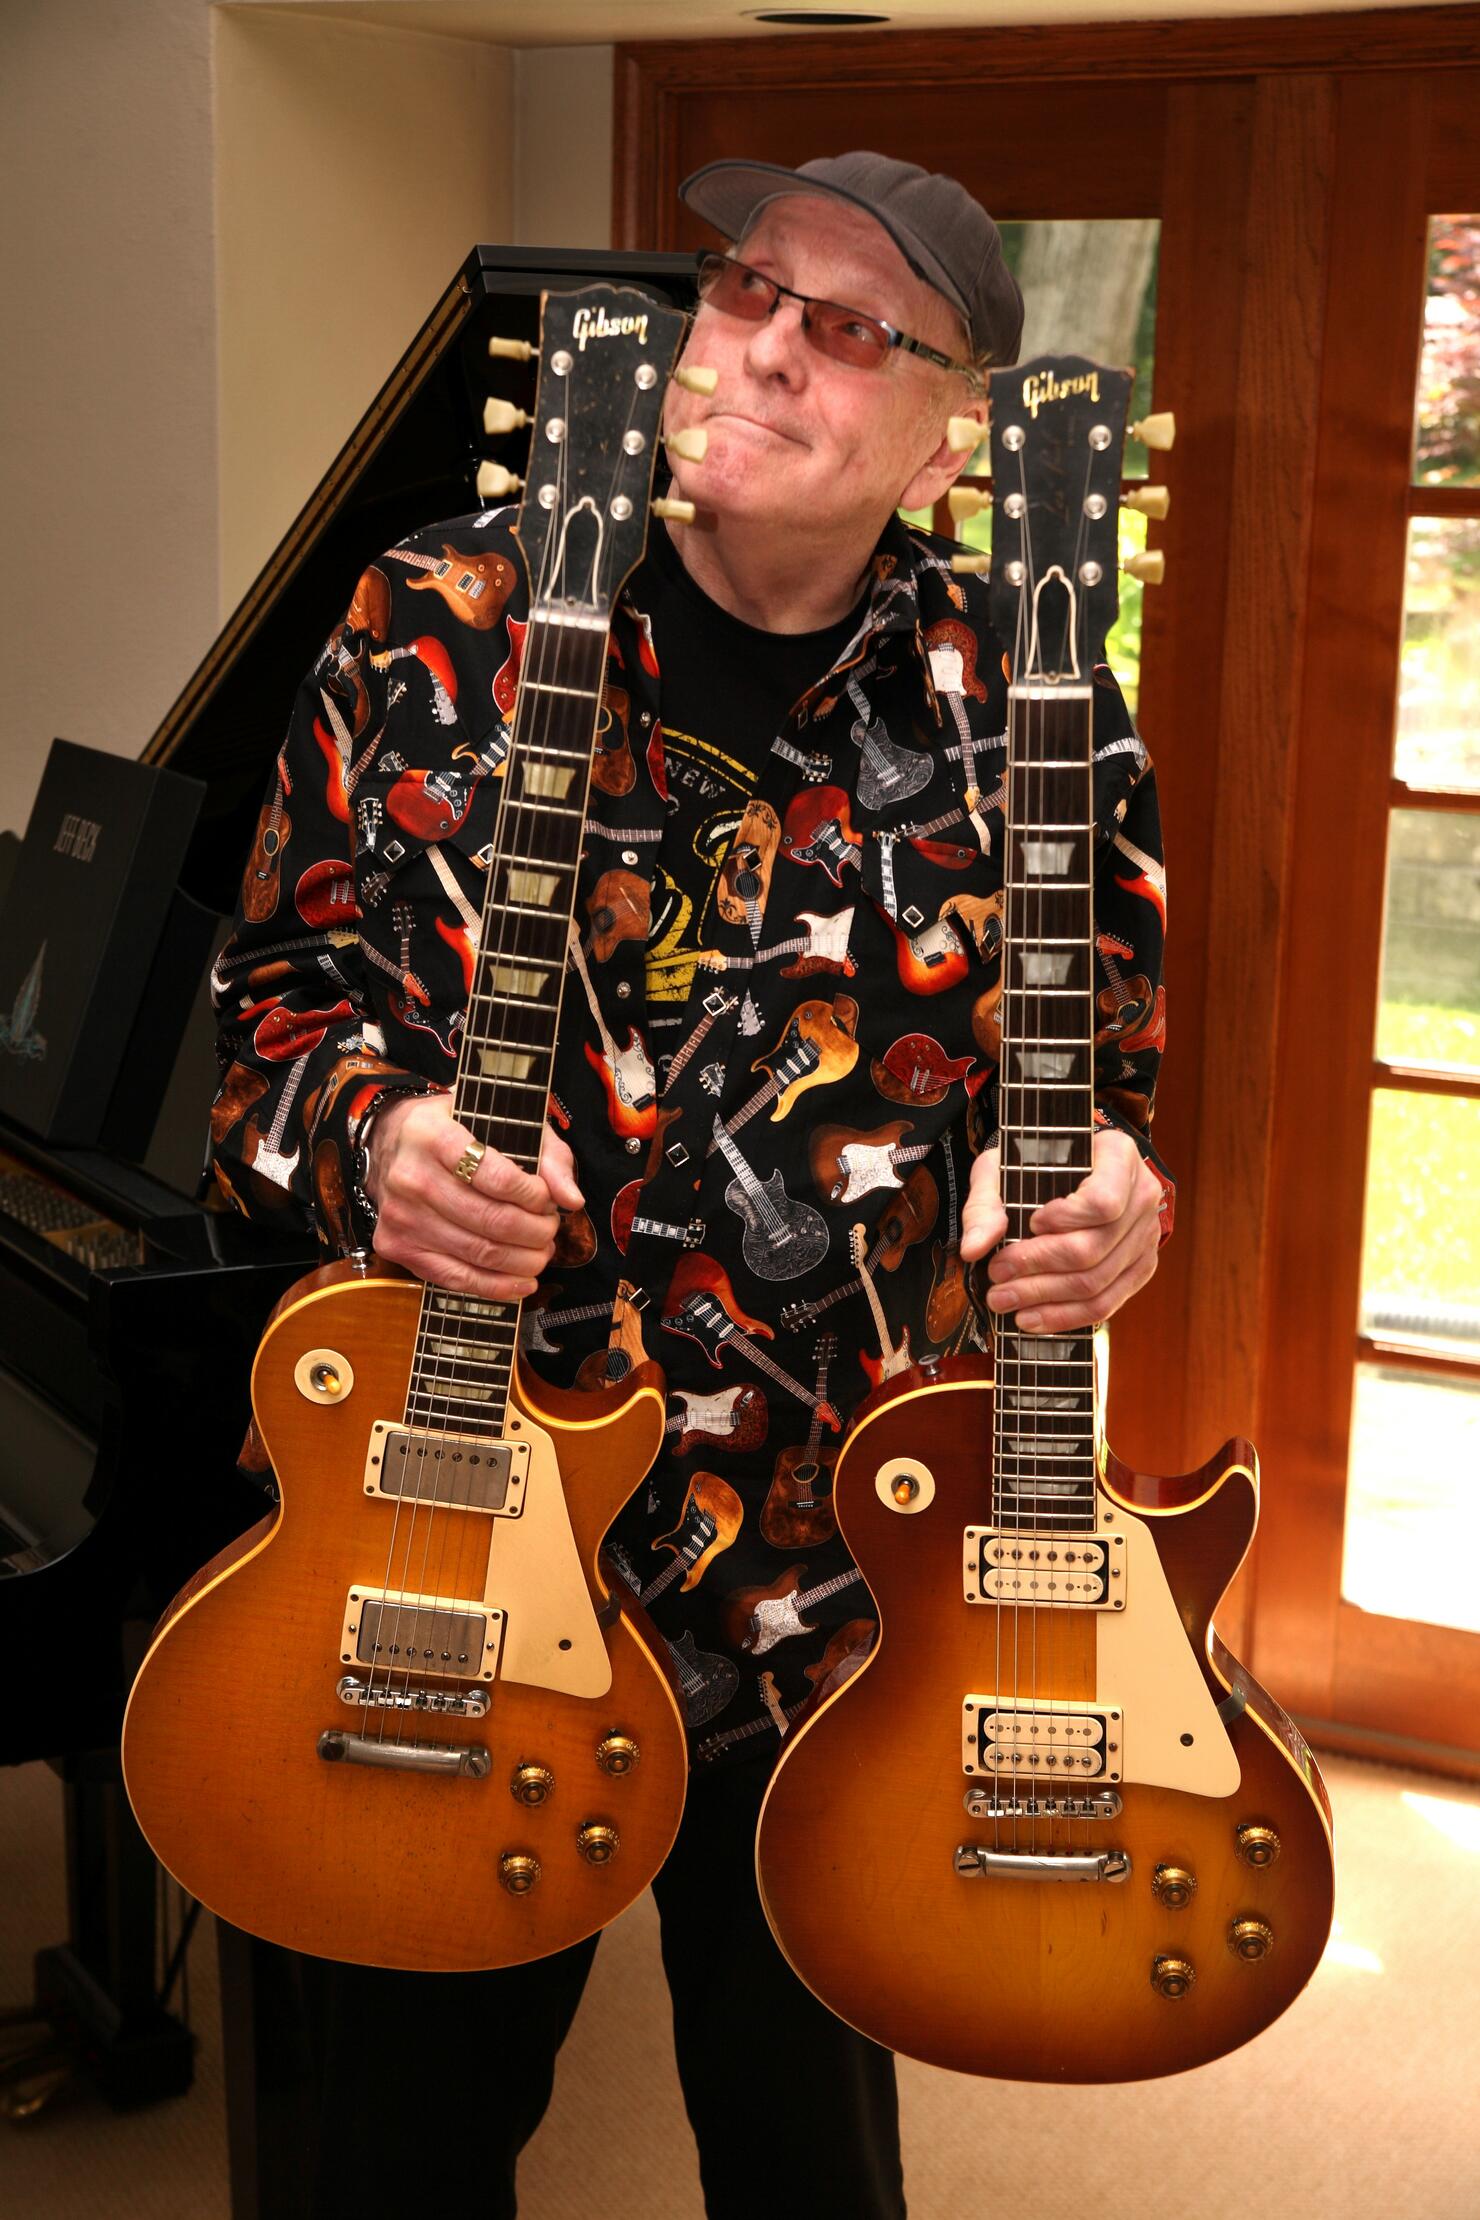 Cheap Trick's Rick Nielsen with his 1959 Les Paul Standards. Photo: Mike Graham.